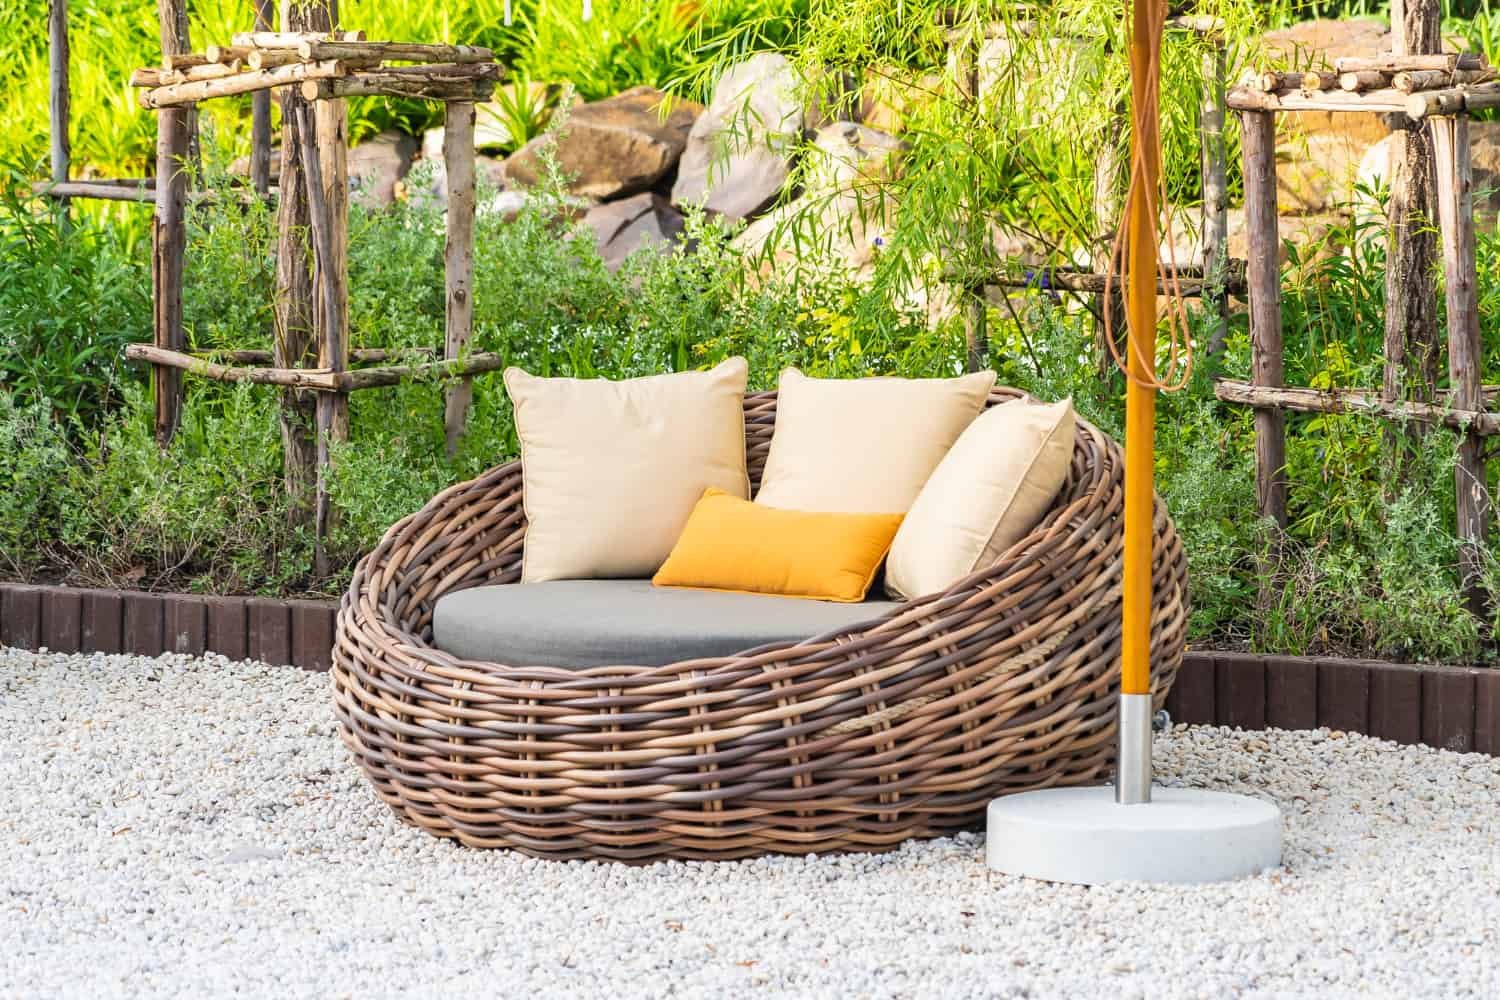 5 Must – Have Furniture Items for Your Garden